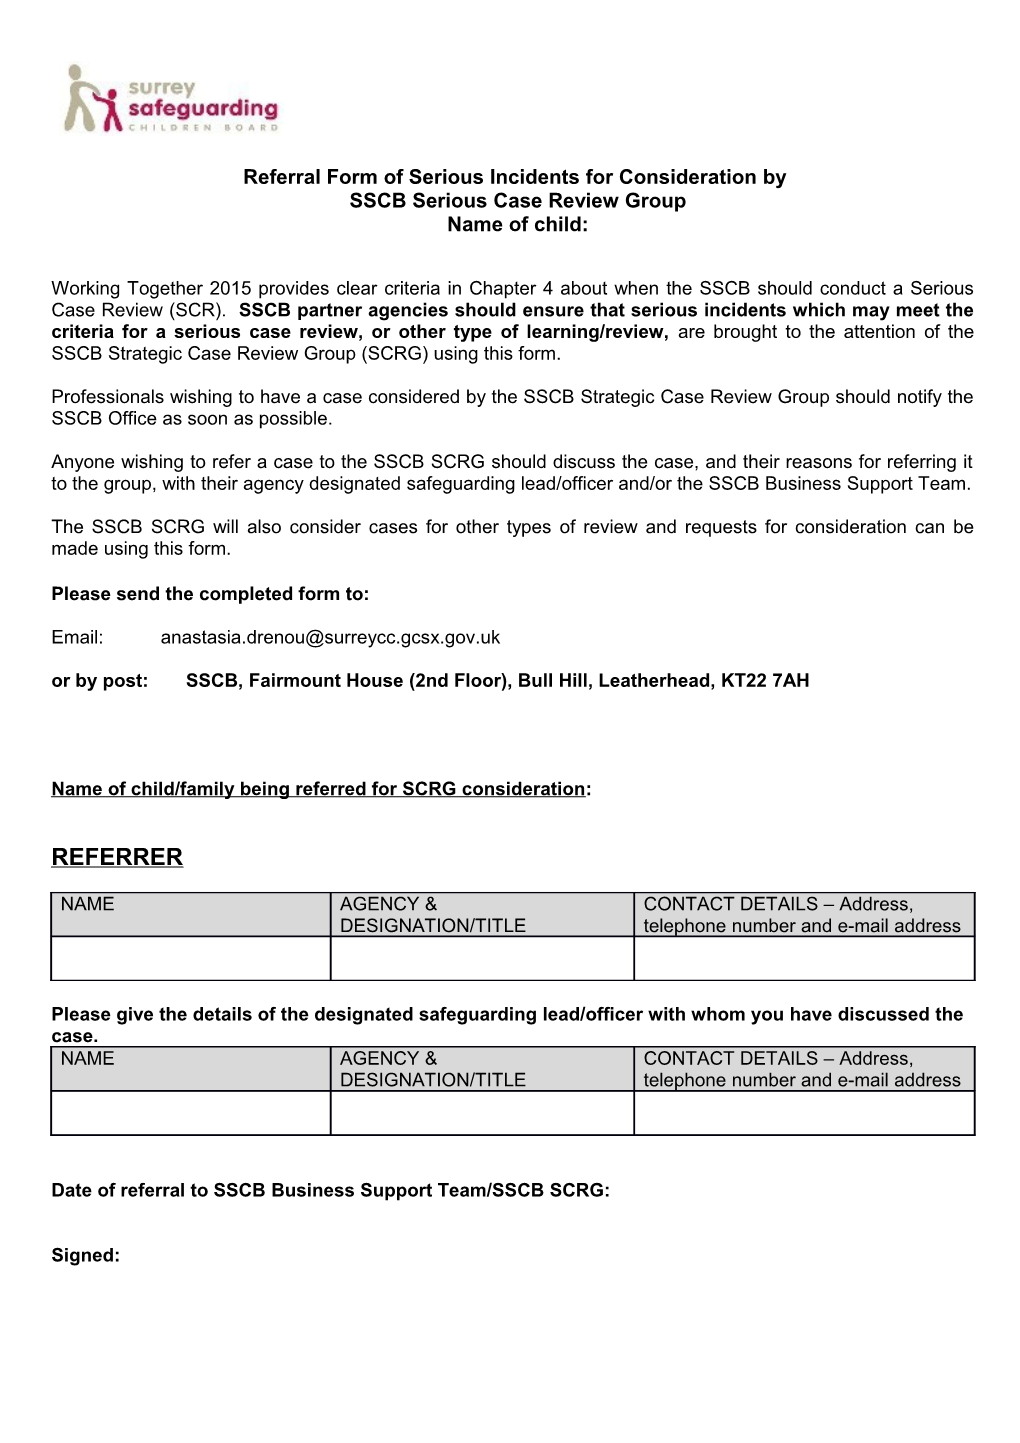 Referral Form of Serious Incidents for Consideration by SSCB Serious Case Review Group